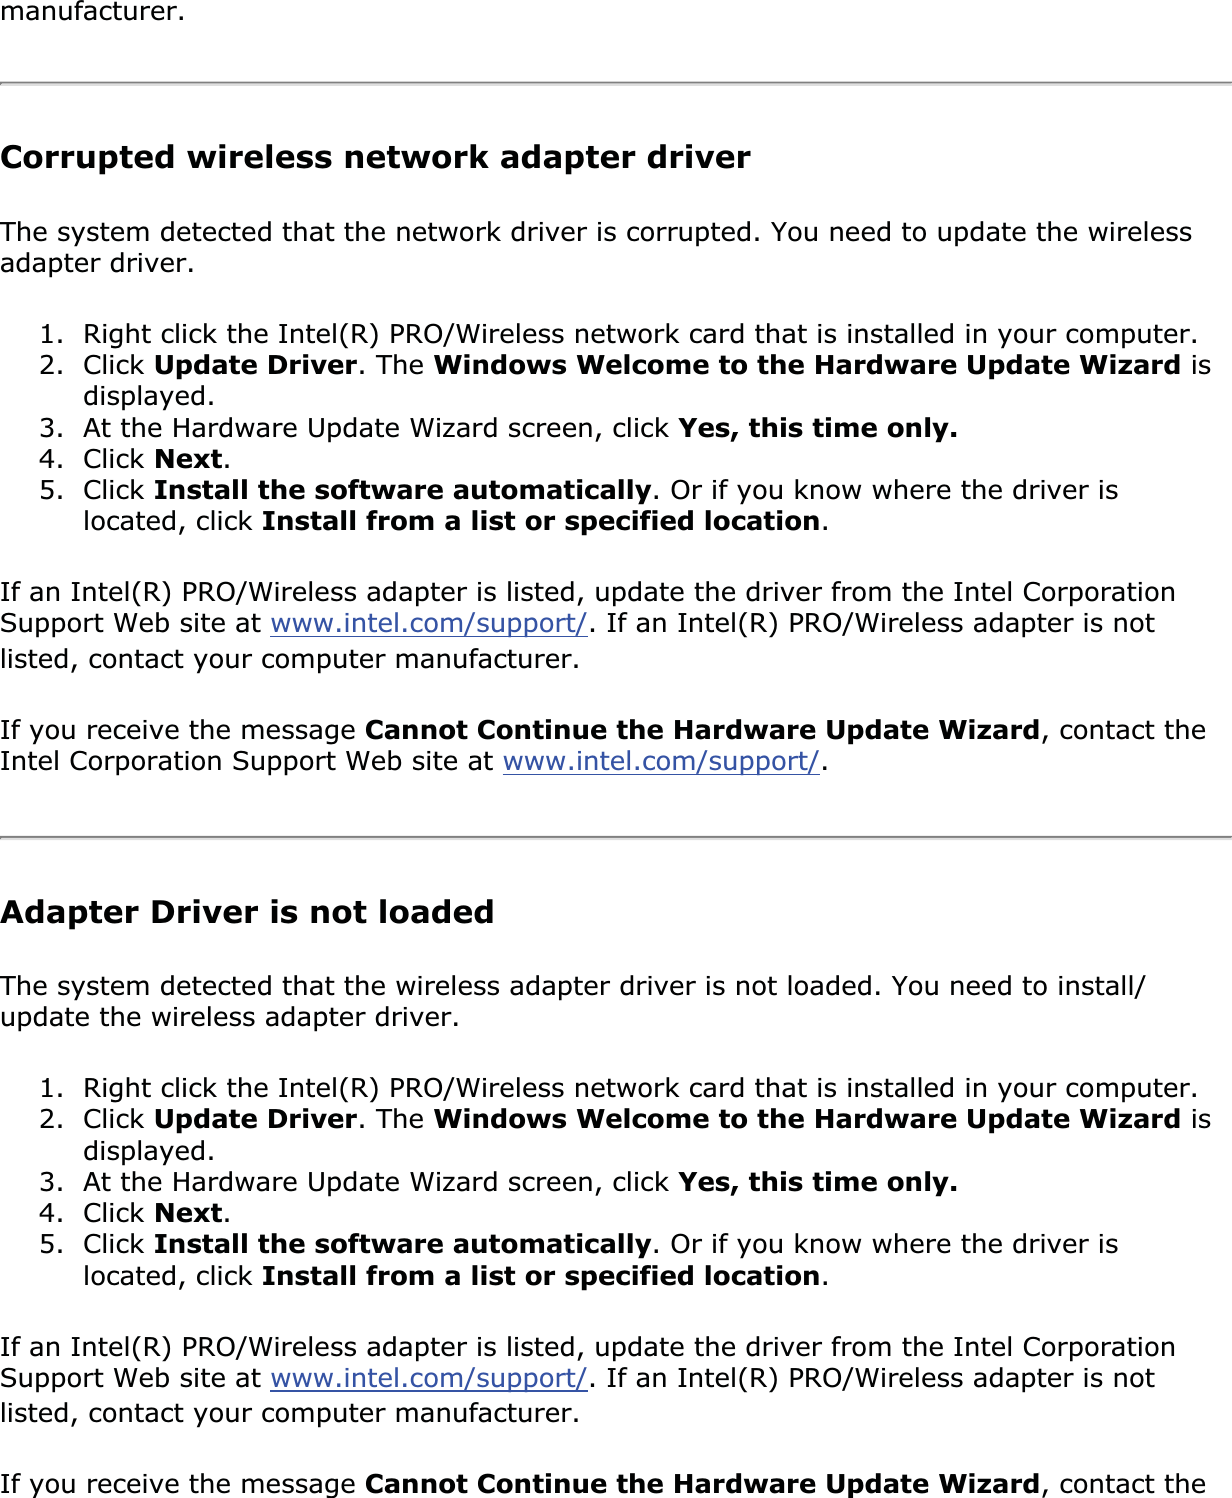 manufacturer.Corrupted wireless network adapter driverThe system detected that the network driver is corrupted. You need to update the wireless adapter driver.1. Right click the Intel(R) PRO/Wireless network card that is installed in your computer.2. Click Update Driver. The Windows Welcome to the Hardware Update Wizard is displayed.3. At the Hardware Update Wizard screen, click Yes, this time only.4. Click Next.5. Click Install the software automatically. Or if you know where the driver is located, click Install from a list or specified location.If an Intel(R) PRO/Wireless adapter is listed, update the driver from the Intel Corporation Support Web site at www.intel.com/support/. If an Intel(R) PRO/Wireless adapter is not listed, contact your computer manufacturer.If you receive the message Cannot Continue the Hardware Update Wizard, contact the Intel Corporation Support Web site at www.intel.com/support/.Adapter Driver is not loadedThe system detected that the wireless adapter driver is not loaded. You need to install/update the wireless adapter driver.1. Right click the Intel(R) PRO/Wireless network card that is installed in your computer.2. Click Update Driver. The Windows Welcome to the Hardware Update Wizard is displayed.3. At the Hardware Update Wizard screen, click Yes, this time only.4. Click Next.5. Click Install the software automatically. Or if you know where the driver is located, click Install from a list or specified location.If an Intel(R) PRO/Wireless adapter is listed, update the driver from the Intel Corporation Support Web site at www.intel.com/support/. If an Intel(R) PRO/Wireless adapter is not listed, contact your computer manufacturer.If you receive the message Cannot Continue the Hardware Update Wizard, contact the 